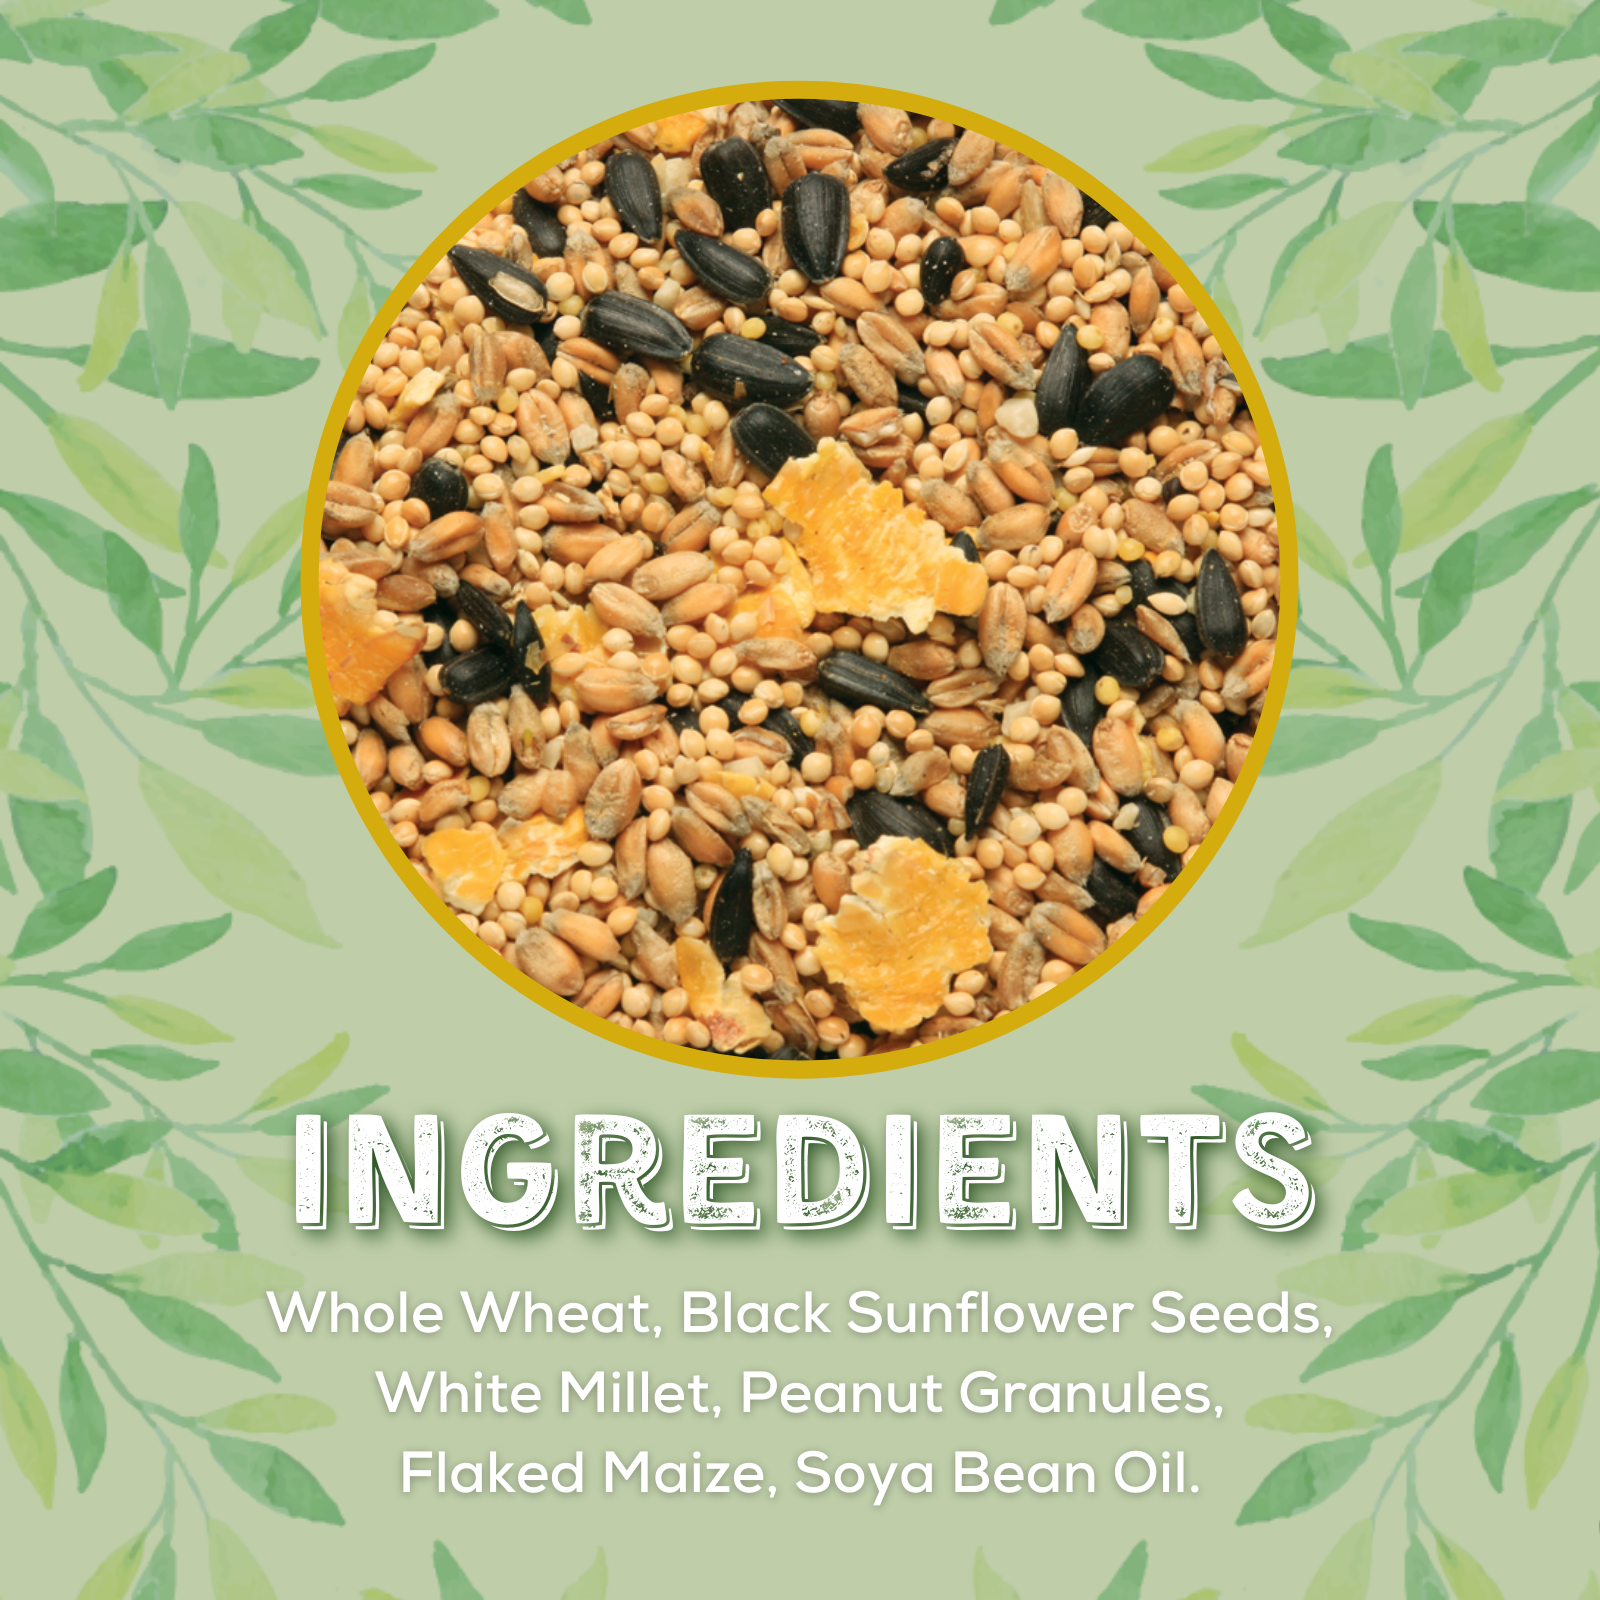 Ingredients: Whole Wheat, Black Sunflower Seeds, White Millet, Peanut Granules, Flaked Maize, Soya Bean Oil